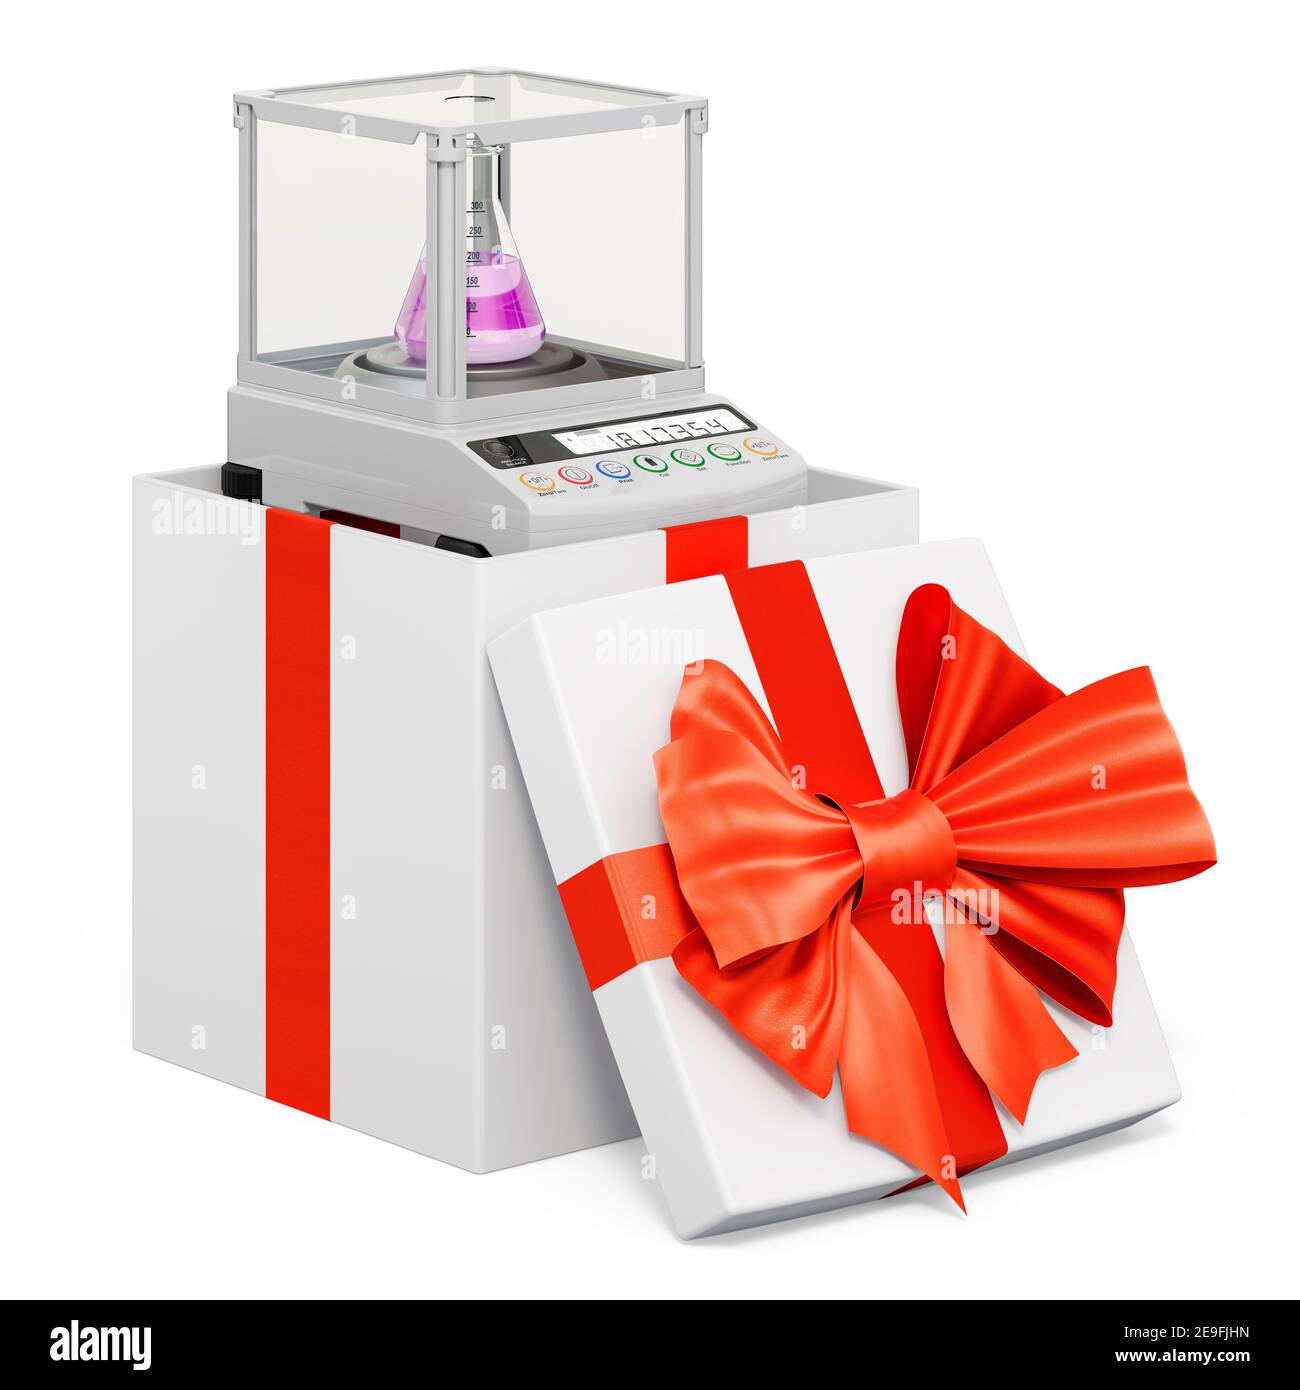 Analytical Balance, Digital Lab Scale inside gift box, present concept. 3D rendering isolated on white background Stock Photo